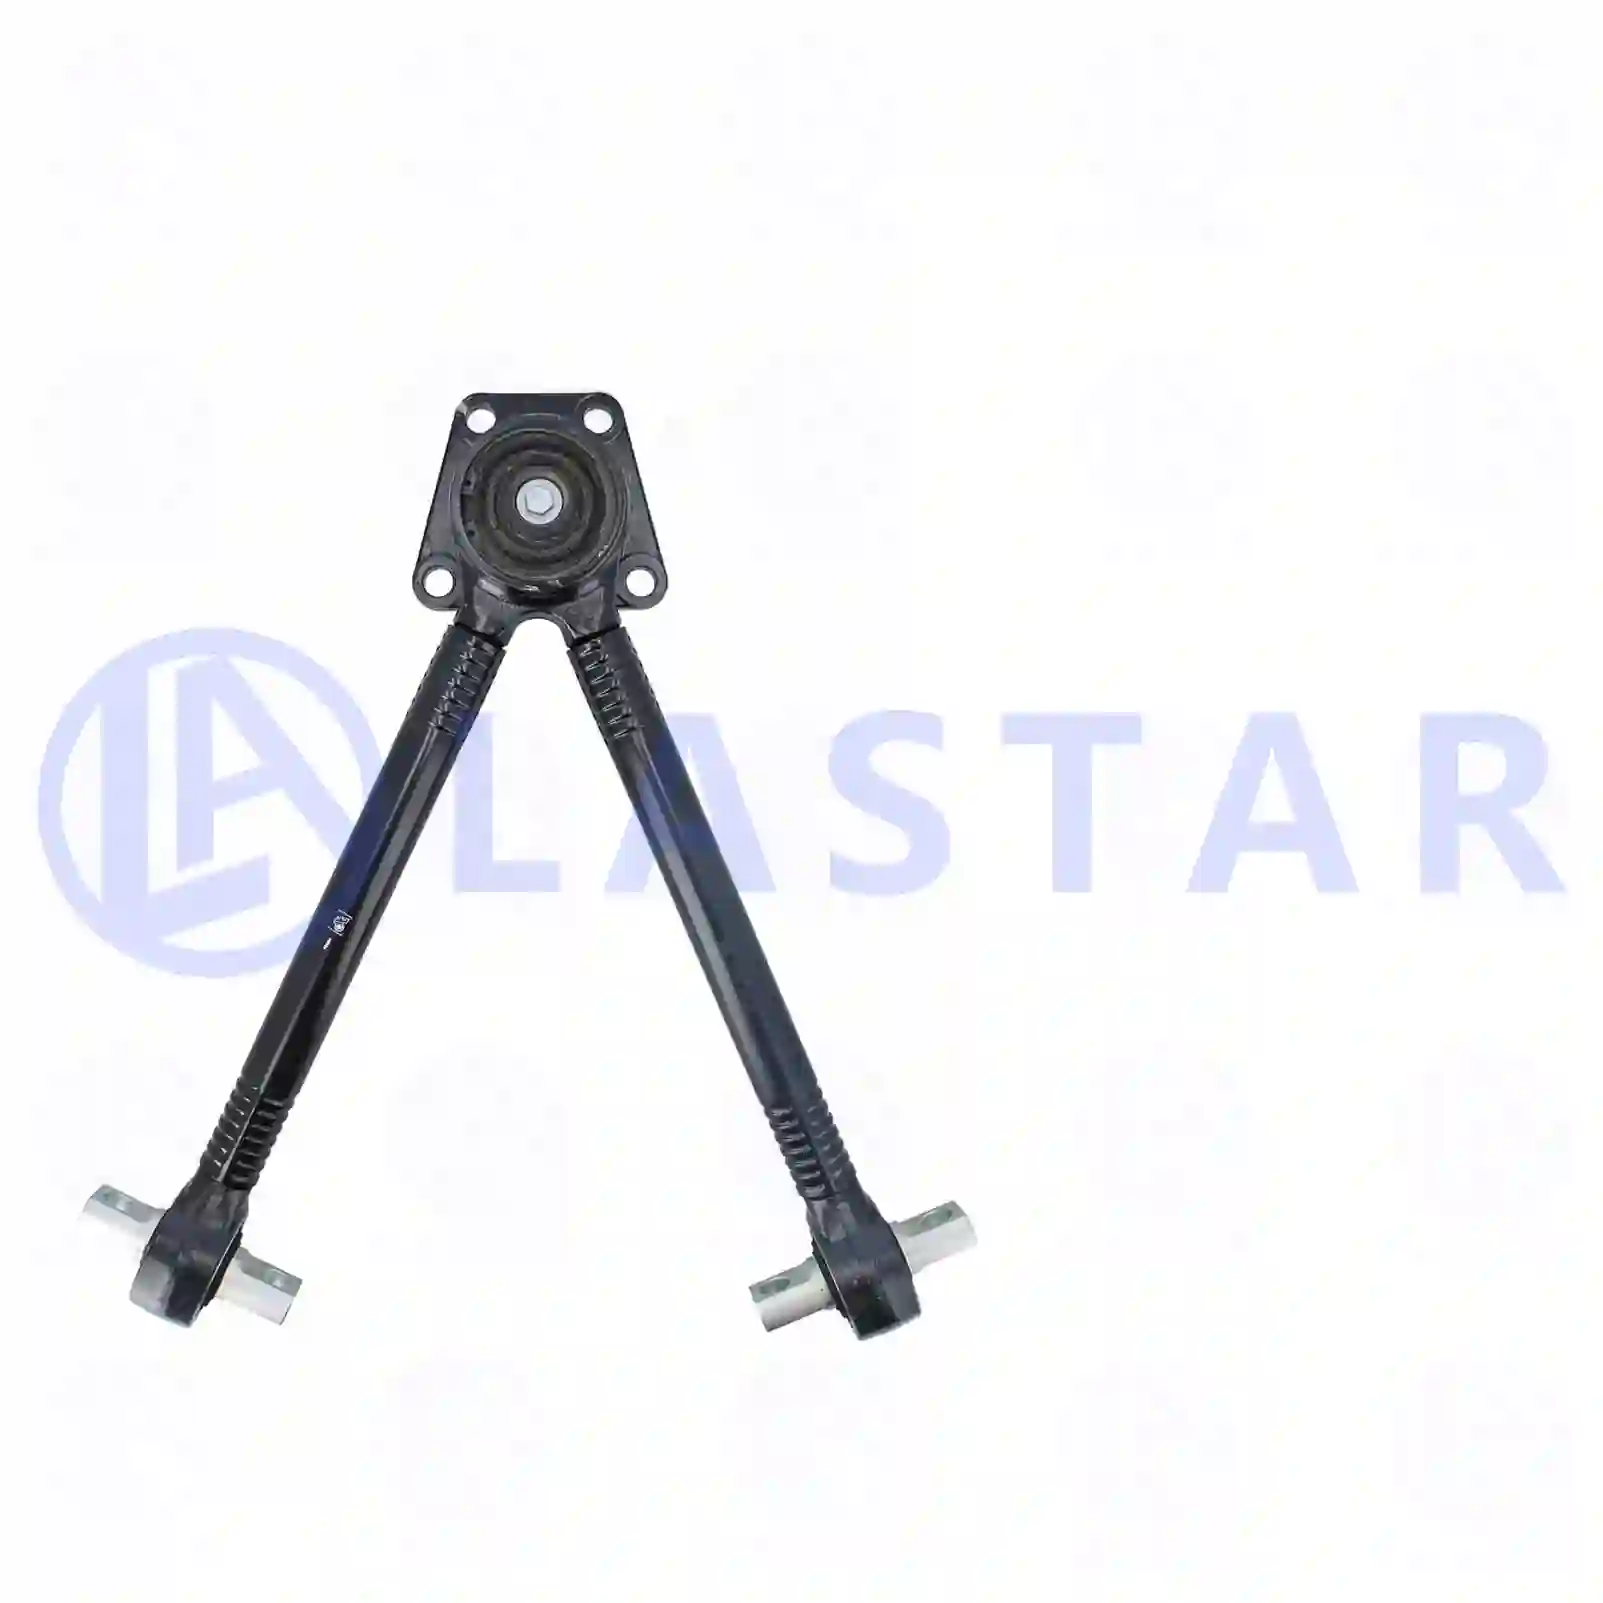 V-stay, 77727485, 1883821, 2001491, 2141264 ||  77727485 Lastar Spare Part | Truck Spare Parts, Auotomotive Spare Parts V-stay, 77727485, 1883821, 2001491, 2141264 ||  77727485 Lastar Spare Part | Truck Spare Parts, Auotomotive Spare Parts